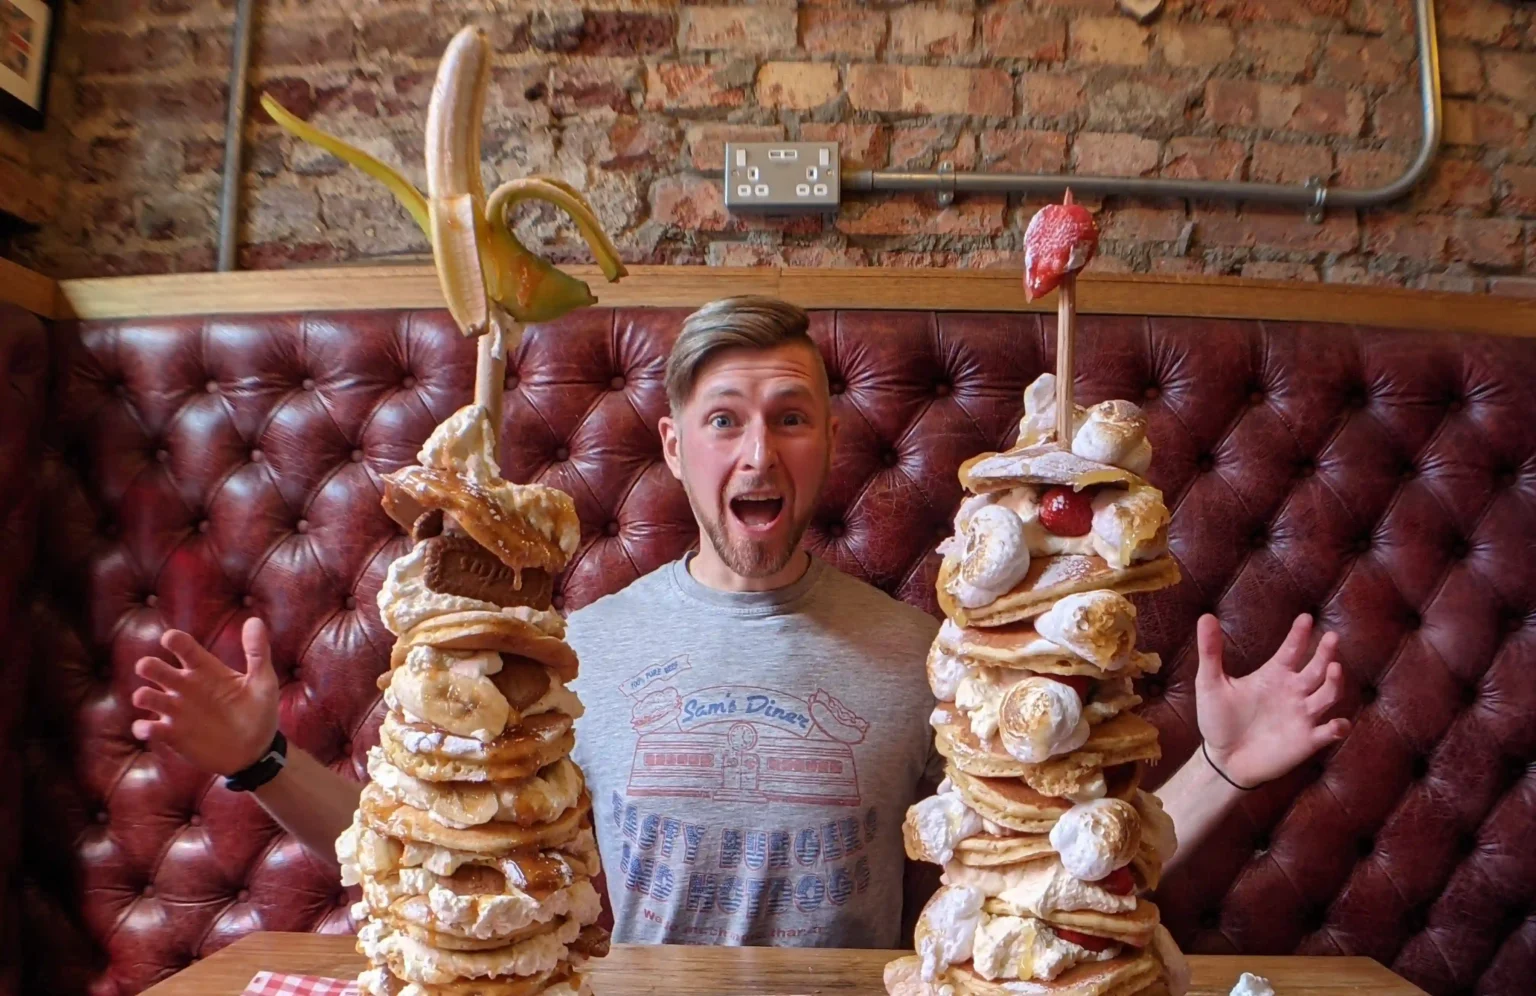 Café challenges brits diners to devour a towering stack of 12 fluffy pancakes at Polo Bar in just 15 minutes and win a free meal, plus a spot on their wall of fame!